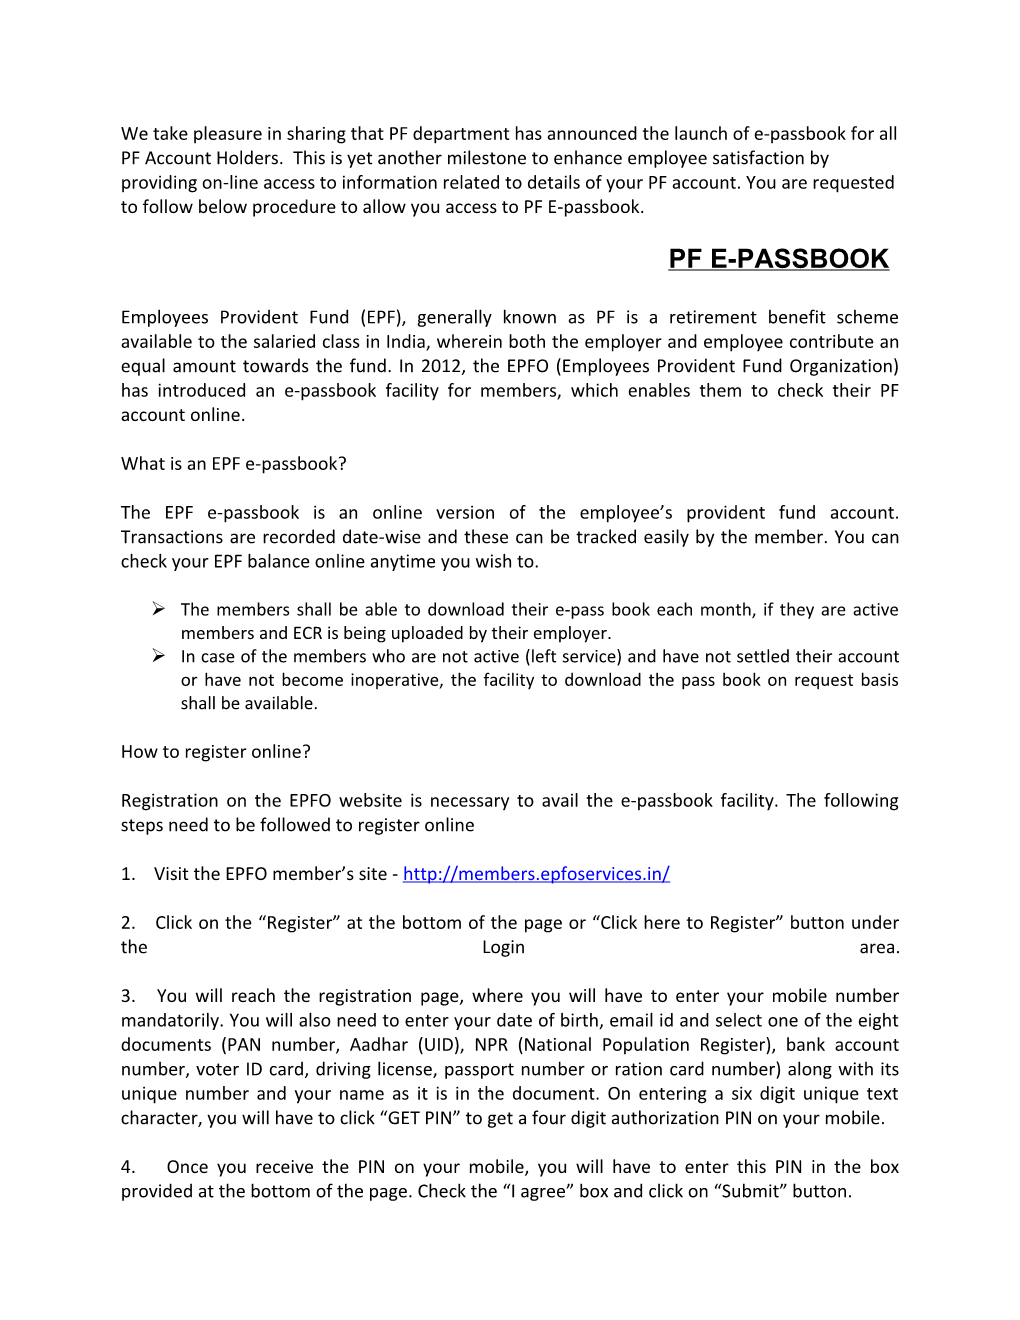 We Take Pleasure in Sharing That PF Department Has Announced the Launch of E-Passbook For